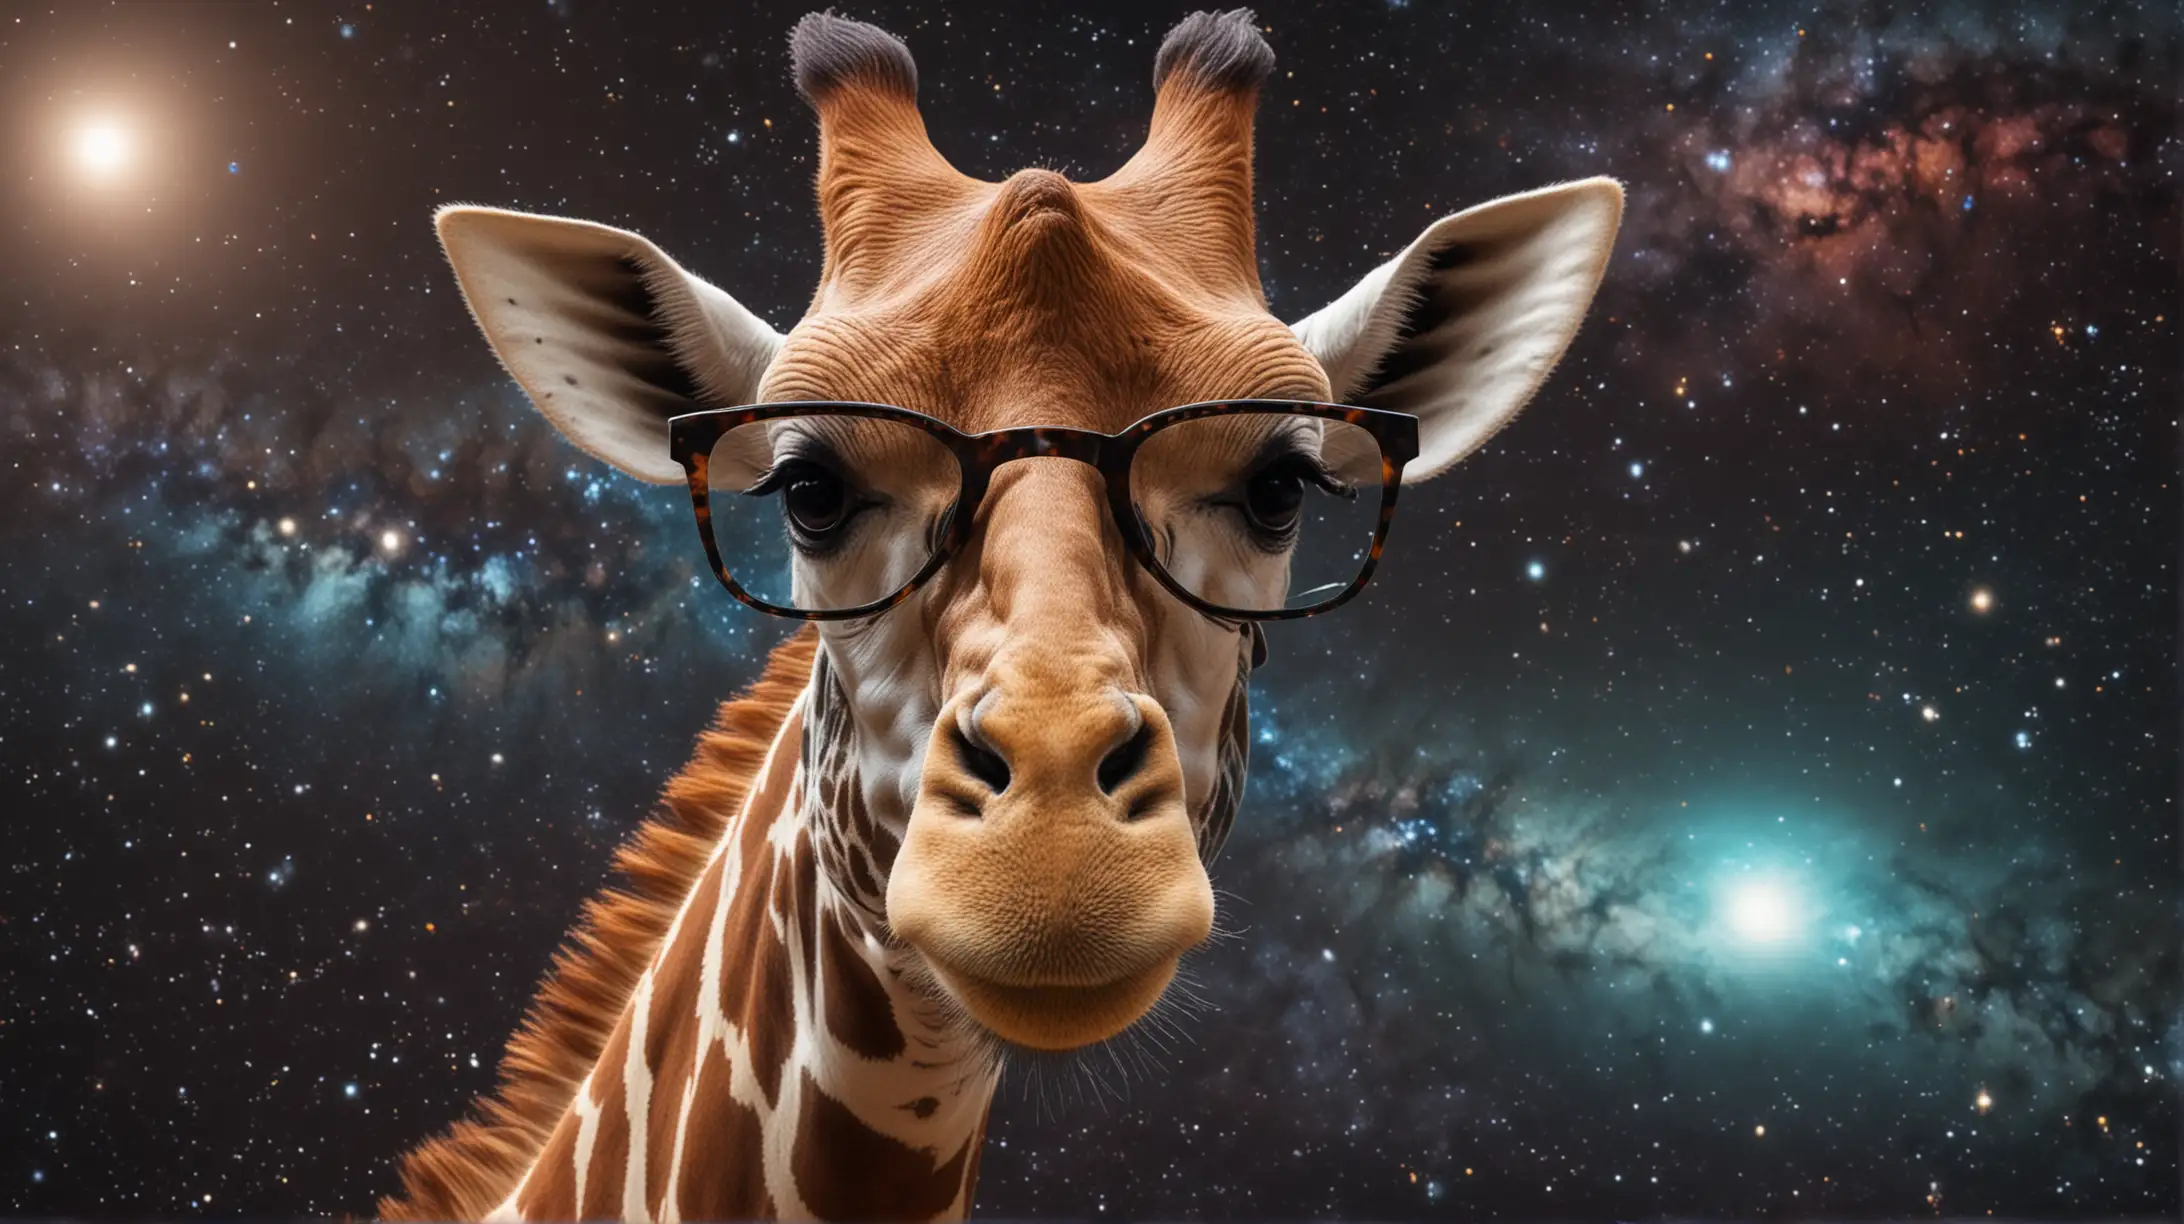 Intergalactic Giraffe with Spectacles Exploring the Cosmos